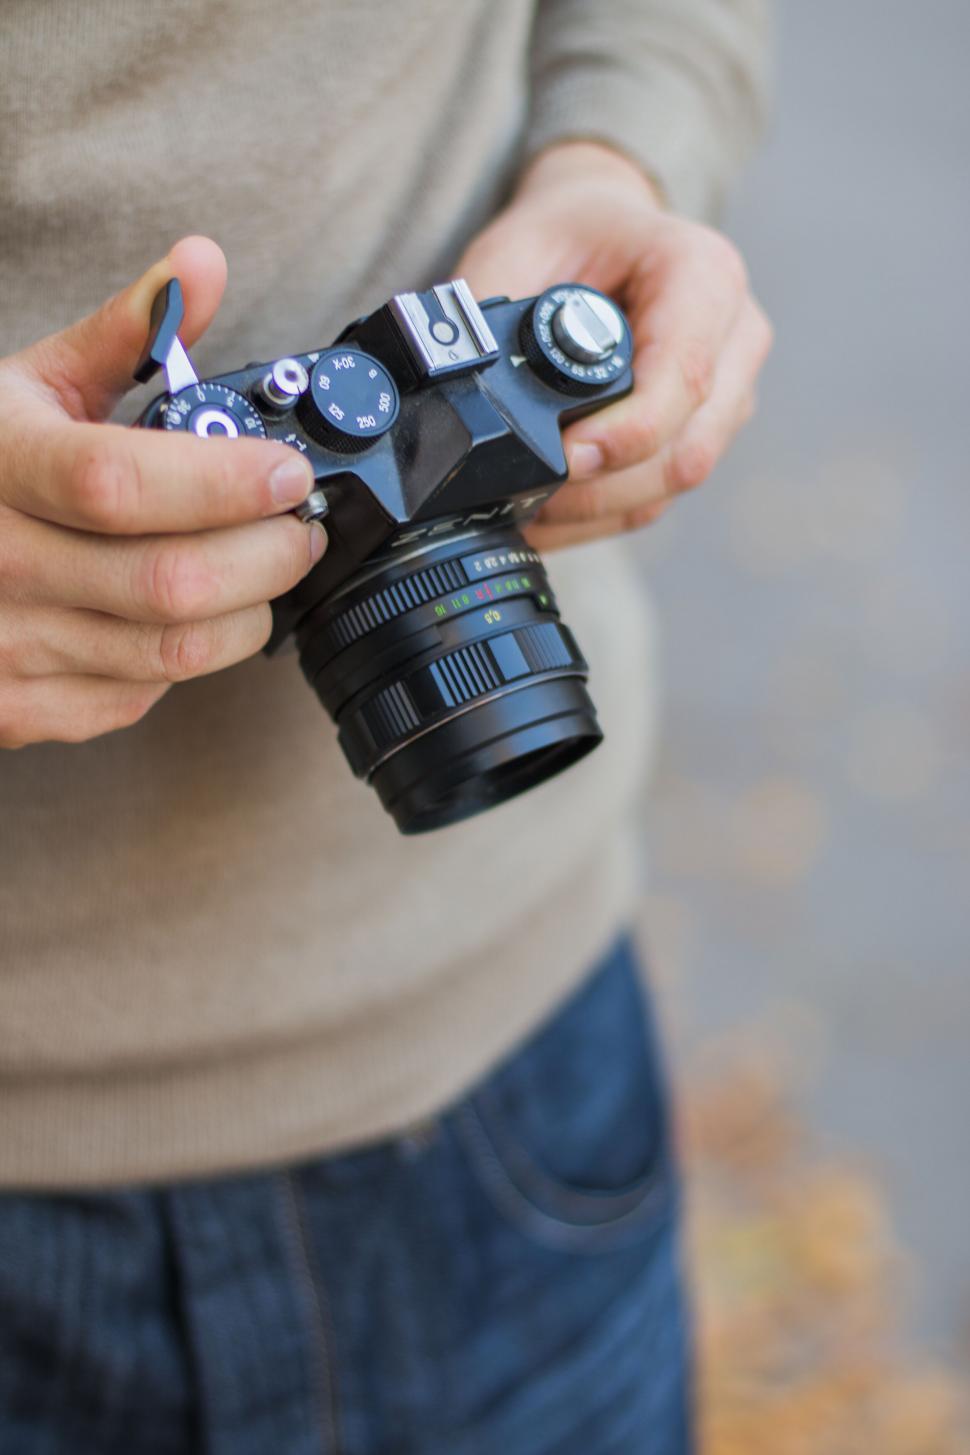 Free Image of A person holding a camera 